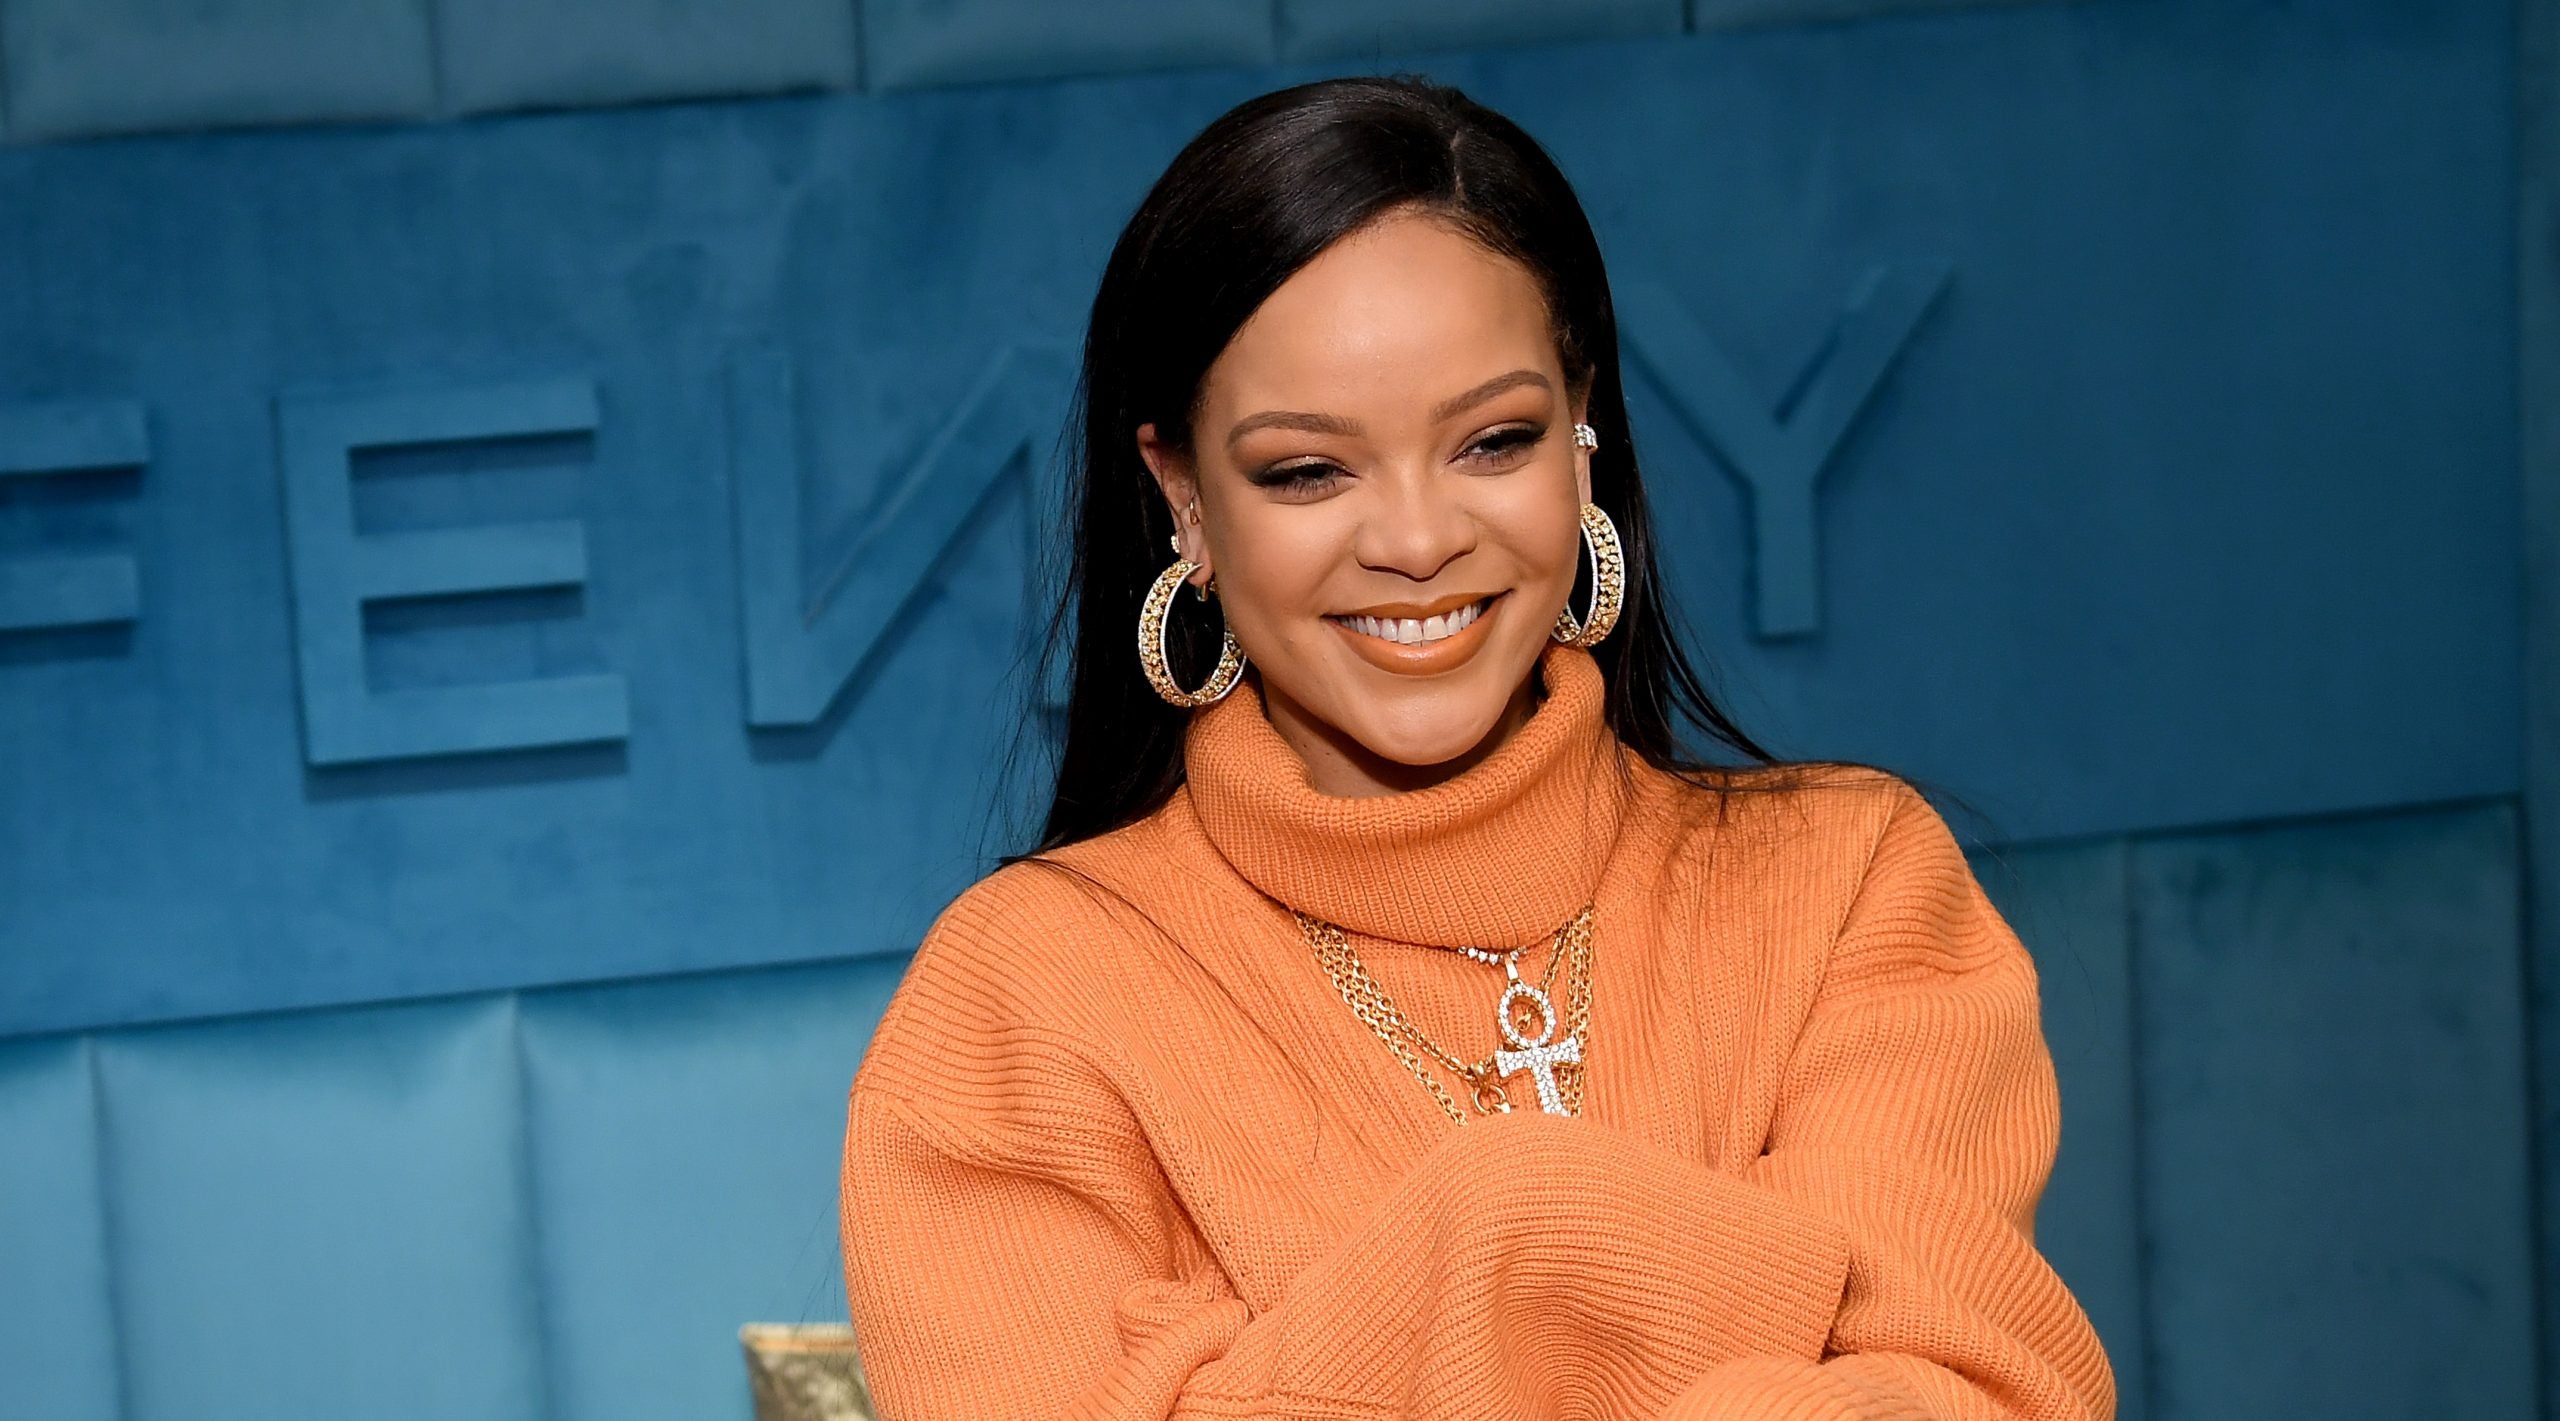 Here Is How Newly Single Rihanna Plans To Spend Valentine's Day